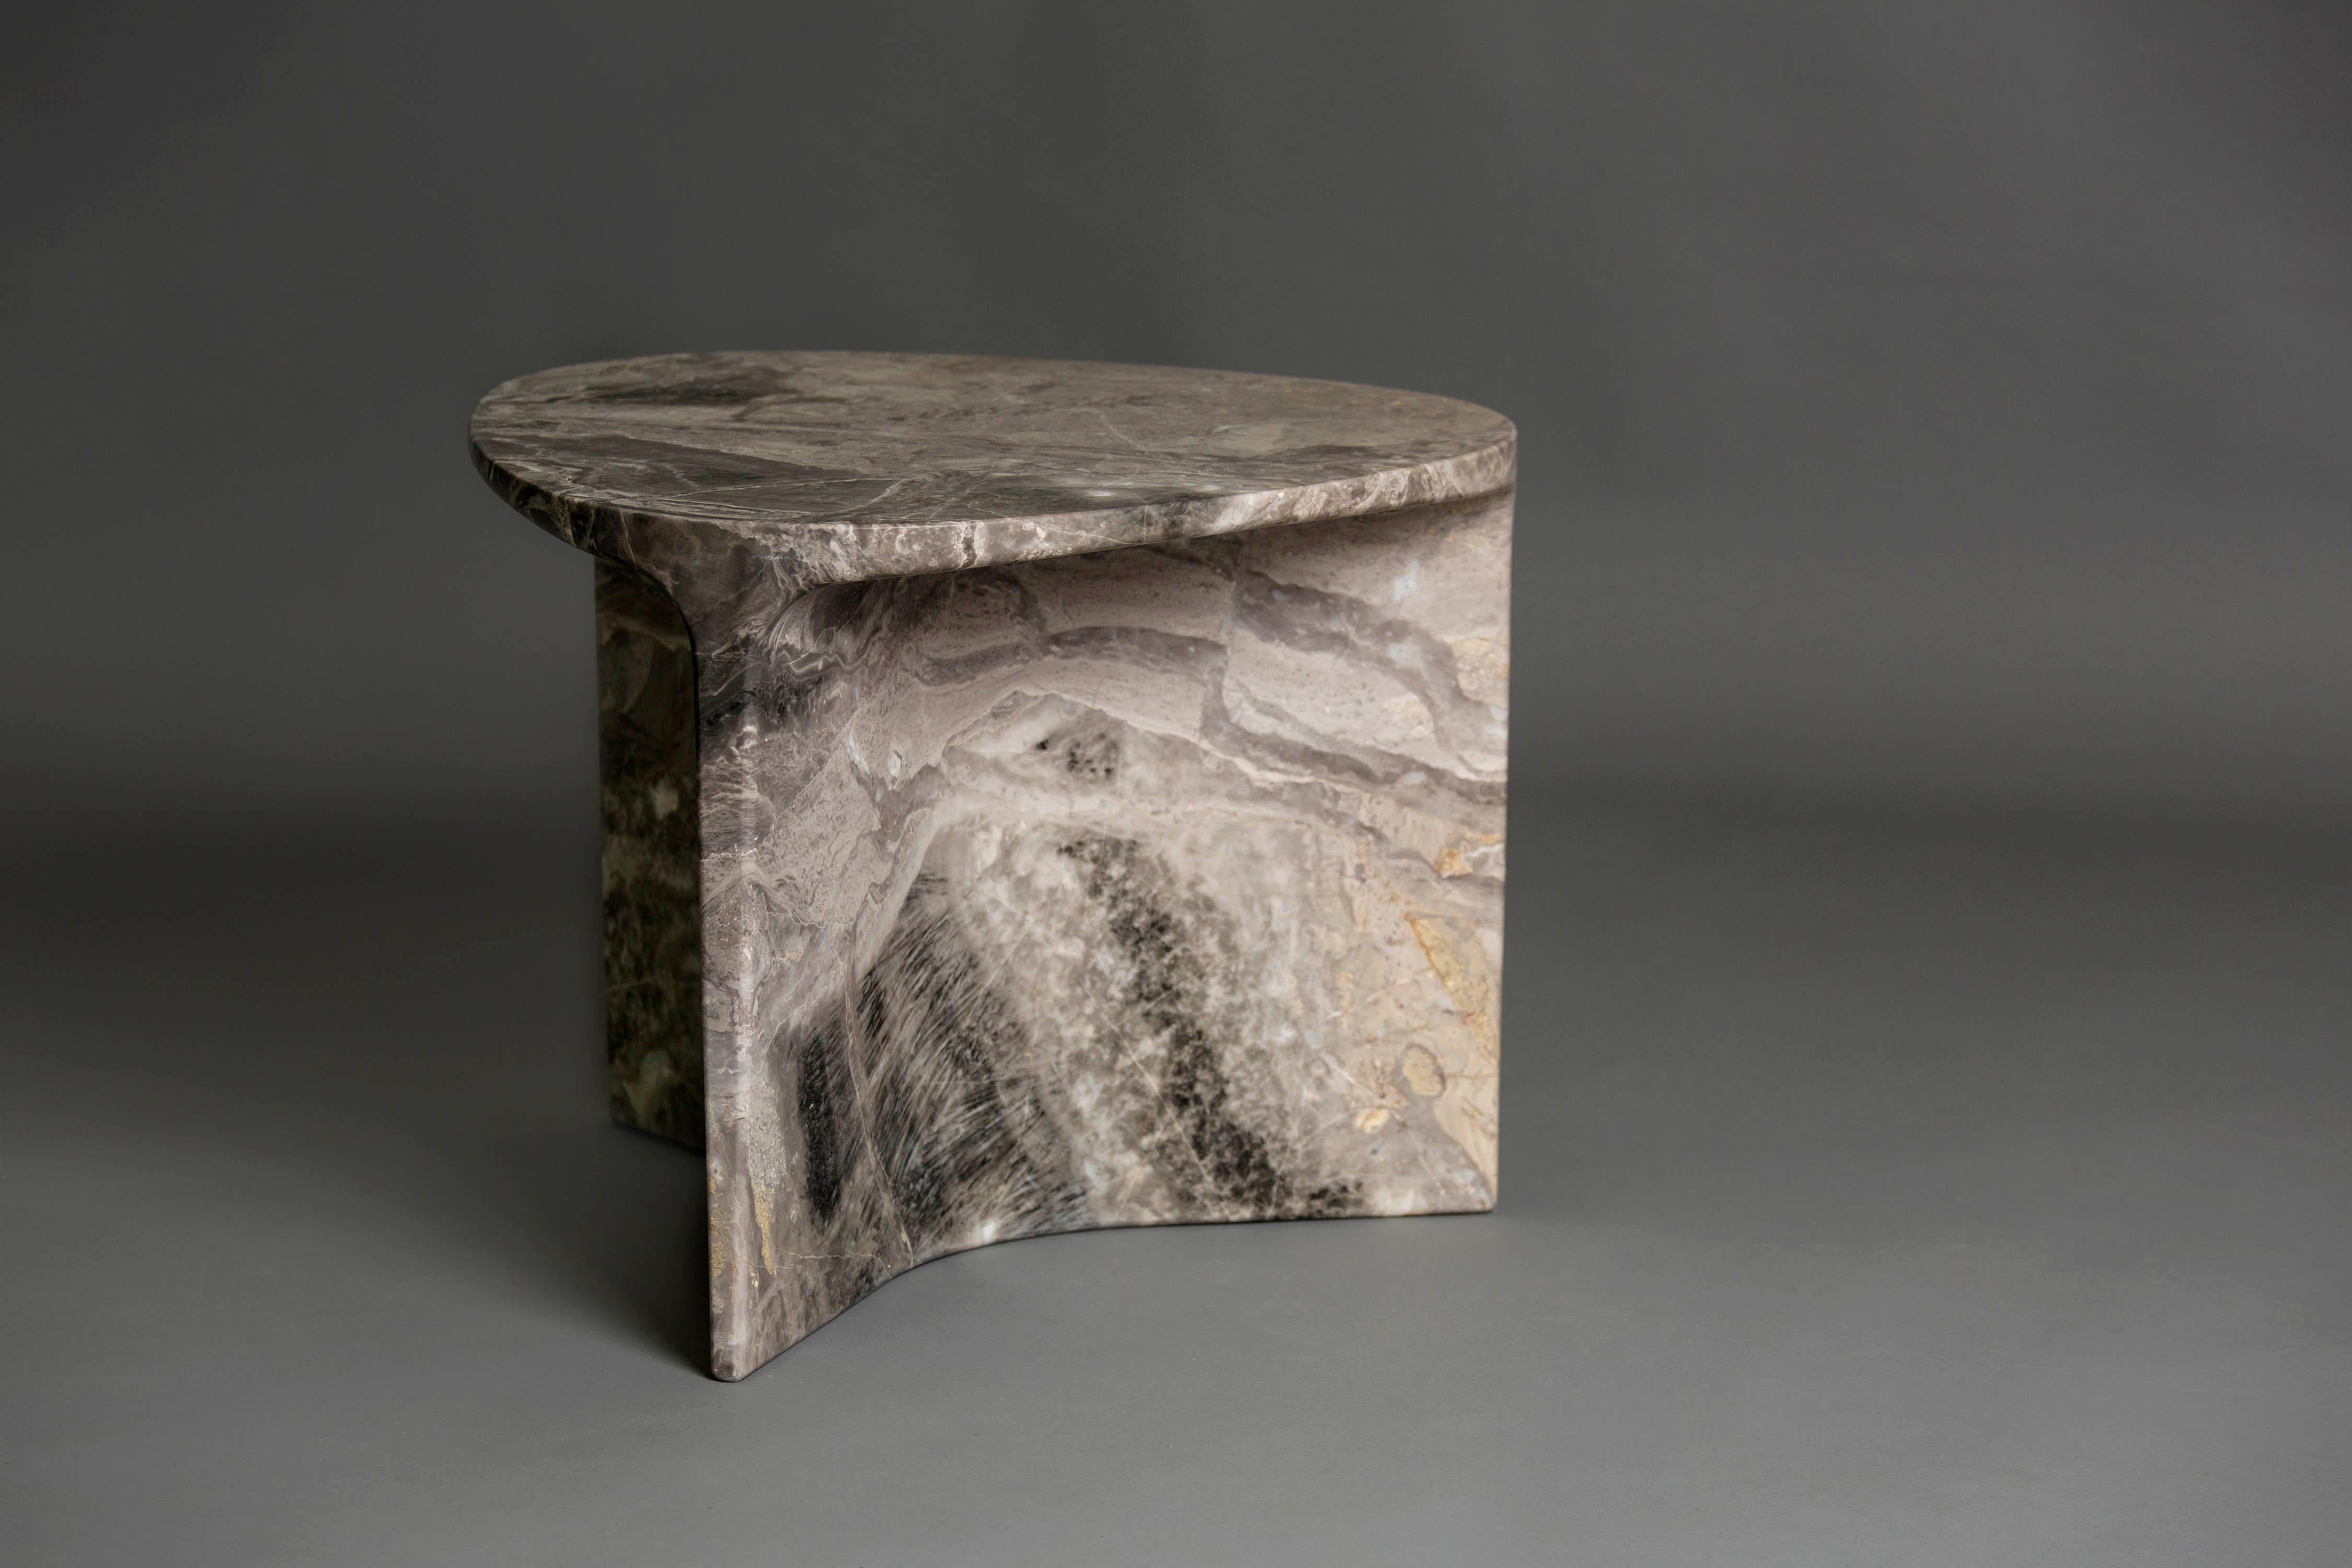 Carv occasional table is Cut from a single block of Italian Orobico marble.
Essential and organic design, naturally creating a flat tabletop flowing
to a Y - shaped foot, revealing the stone’s veins
from the exterior surface through to it’s